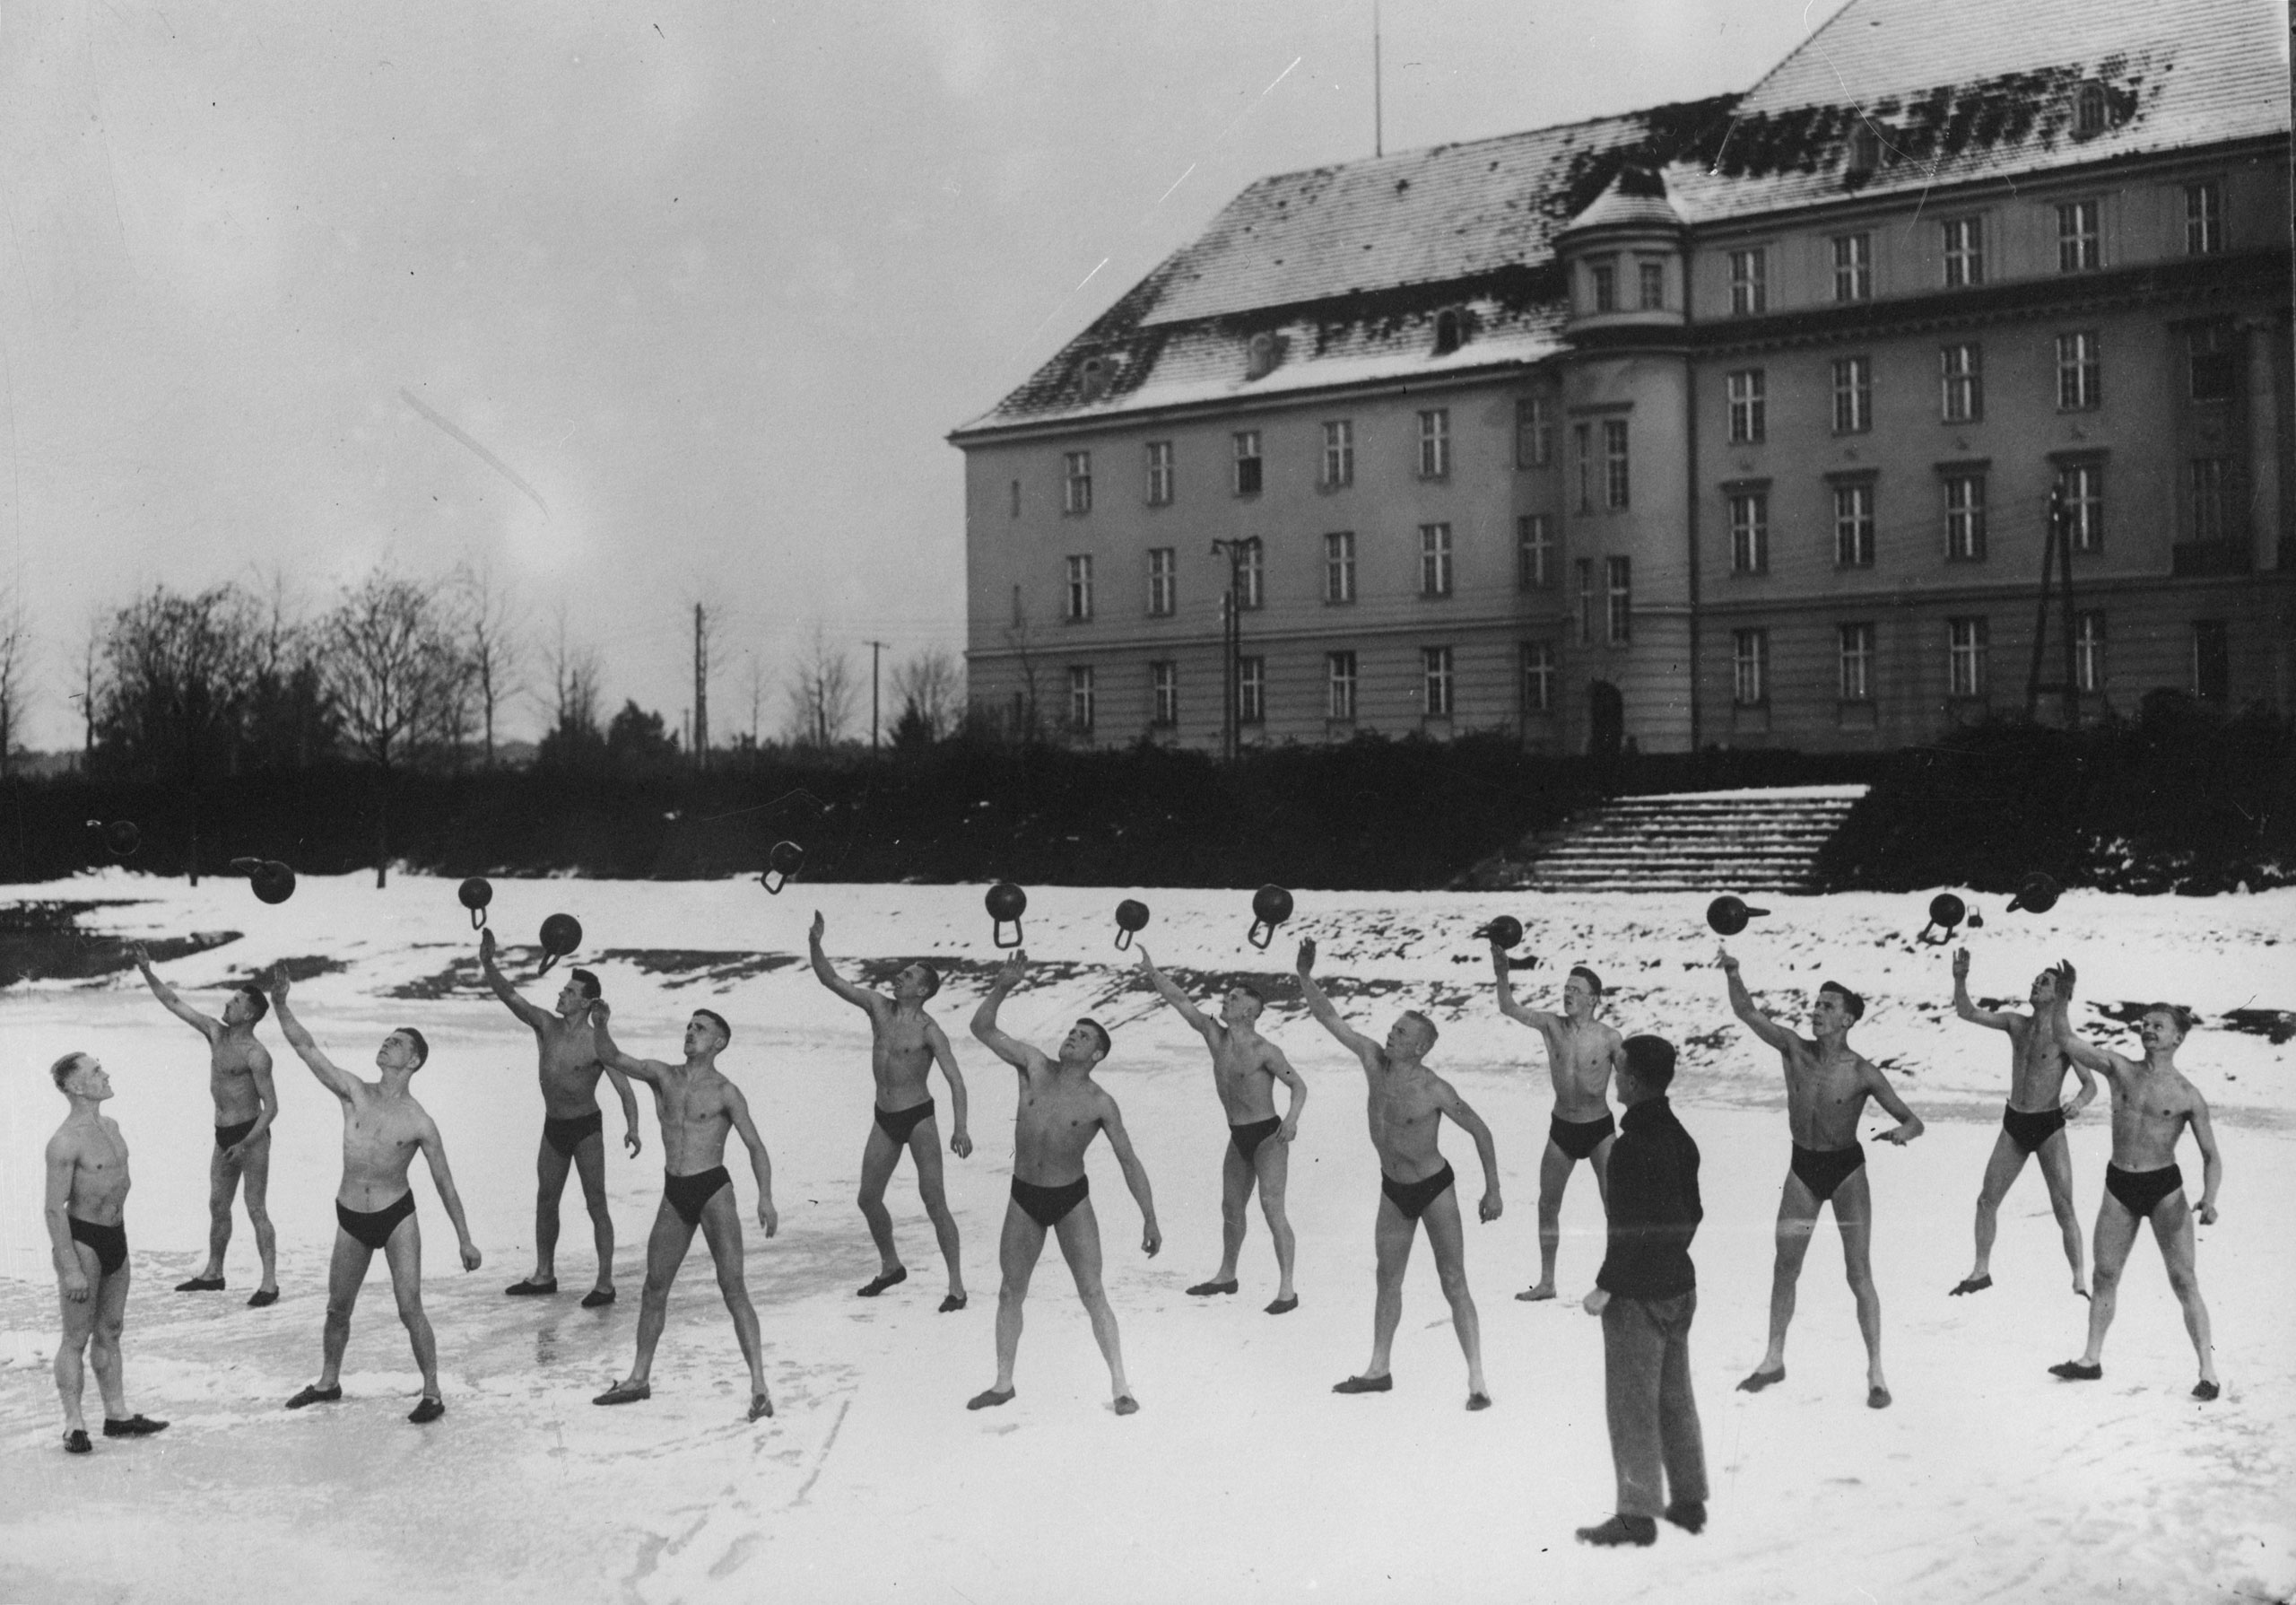 A group of determined men exercising outside in the snow, circa 1926.